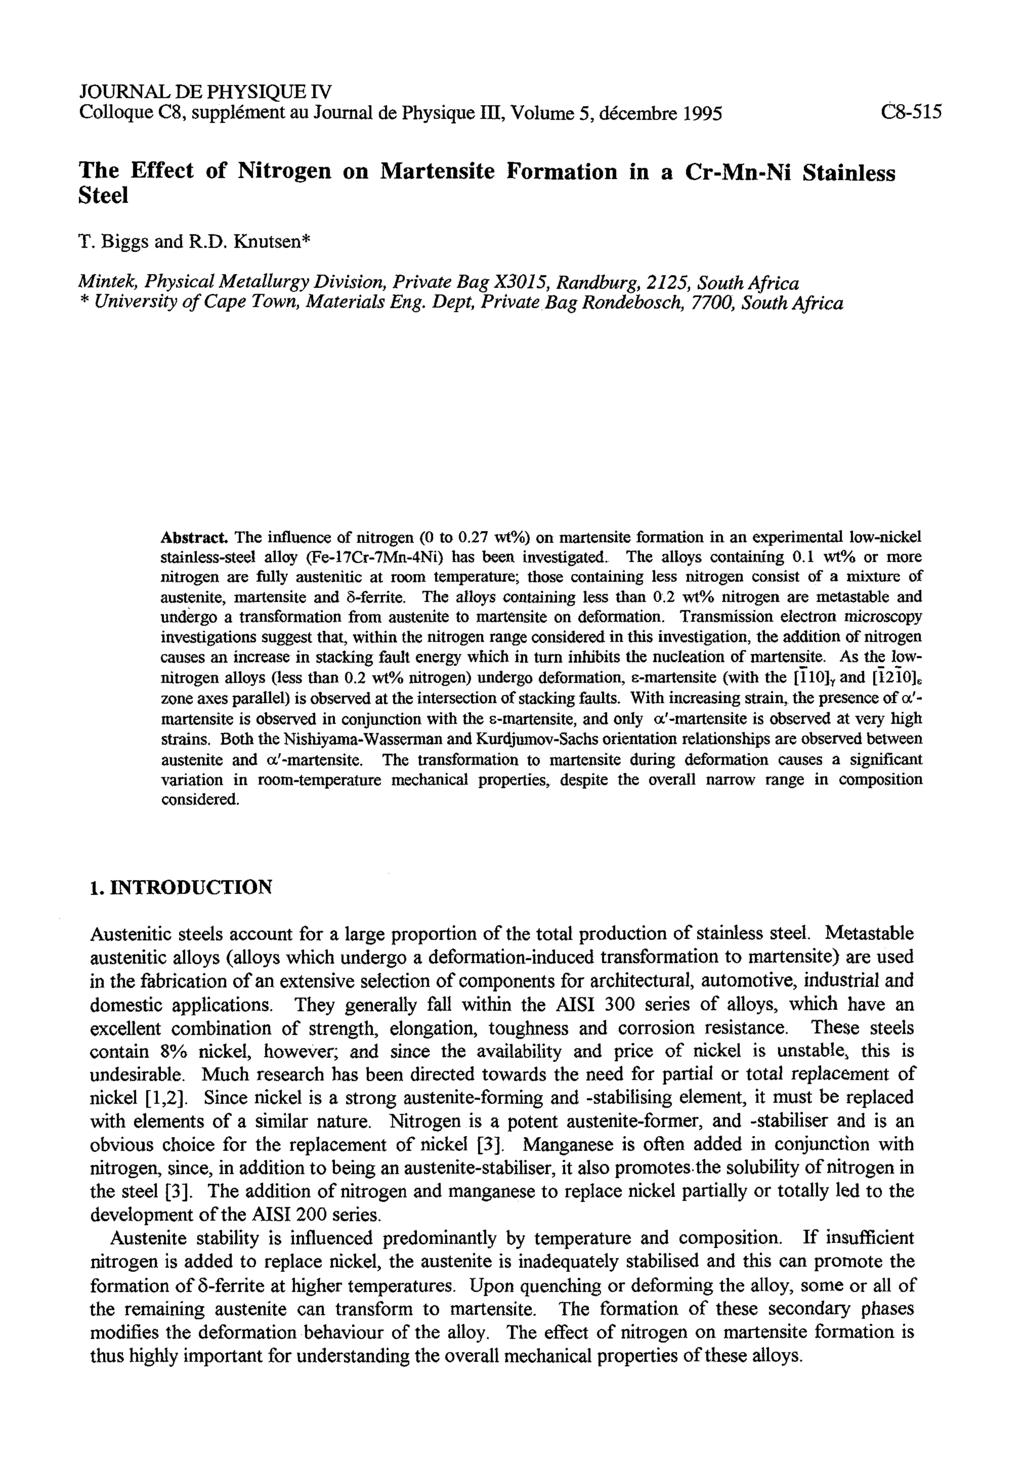 JOURNAL DE PHYSIQUE IV Colloque C8, supplkment au Journal de Physique 111, Volume 5, dkcembre 1995 C8-515 The Effect of Nitrogen on Martensite Formation in a Cr-Mn-Ni Stainless Steel T. Biggs and R.D. Knutsen* Mintek, Physical Metallurgy Division, Private Bag X3015, Randburg, 2125, South Africa * University of Cape Town, Materials Eng.